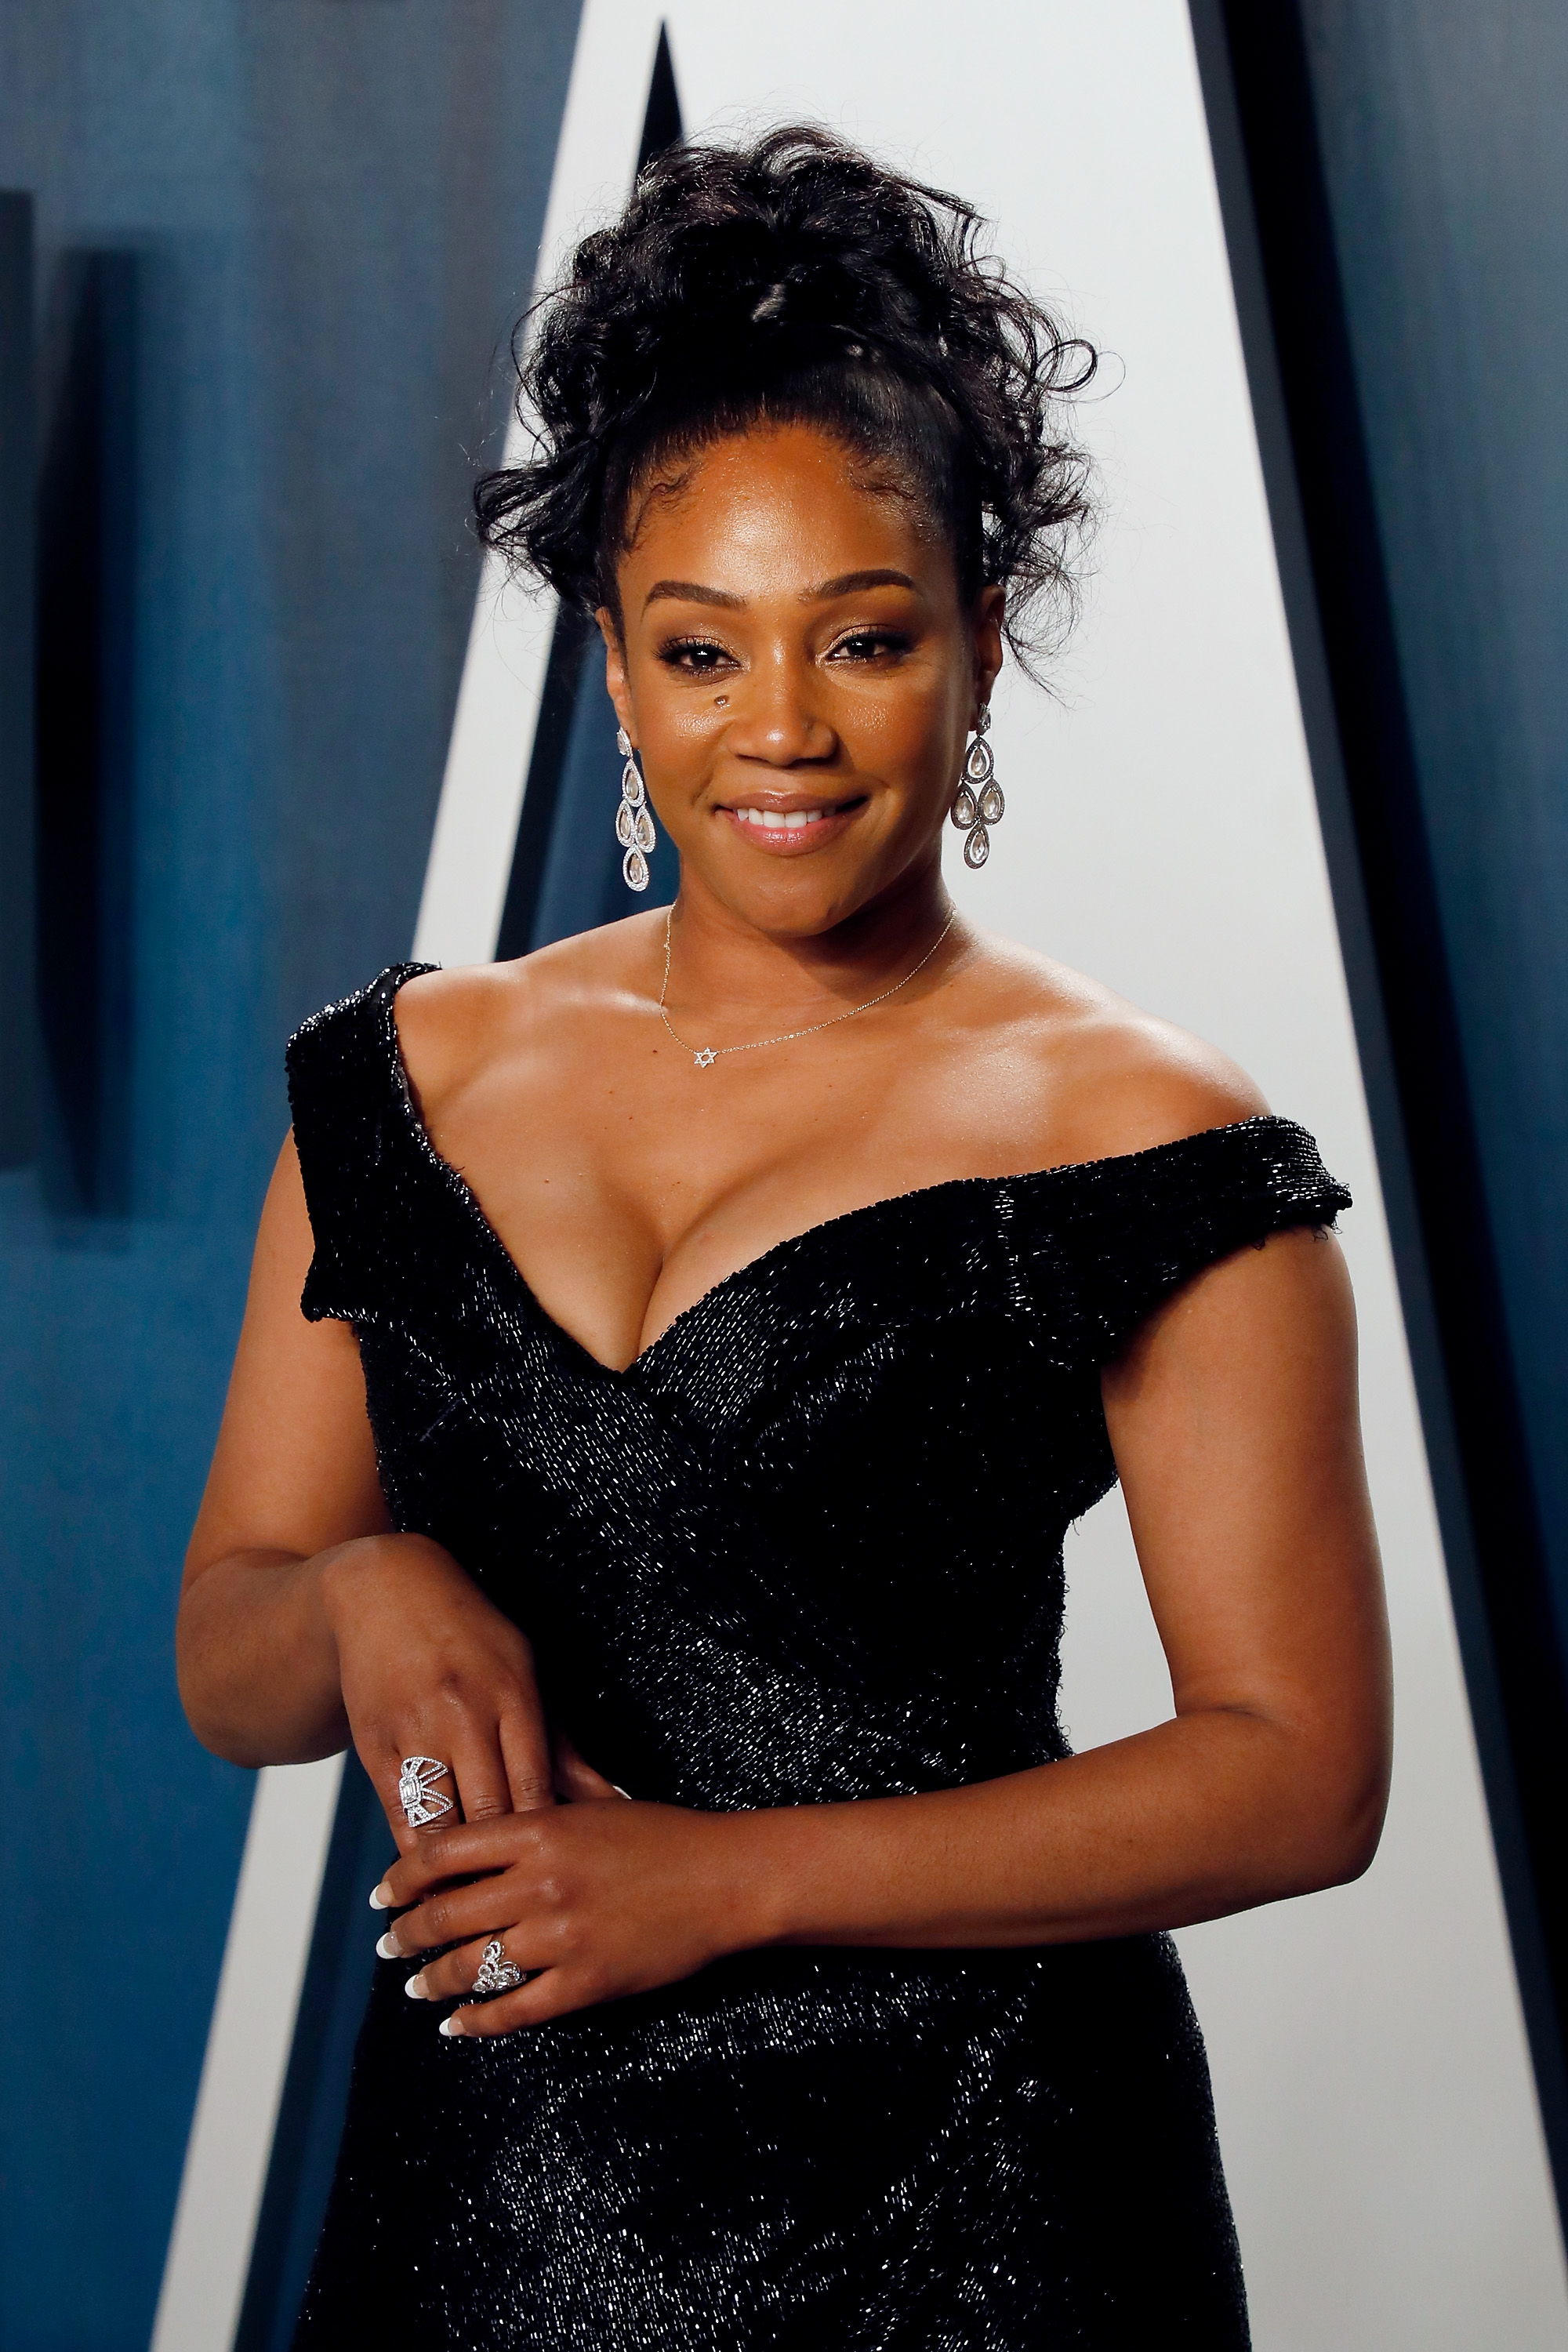 Tiffany Haddish attends the Vanity Fair Oscar Party at Wallis Annenberg Center for the Performing Arts 